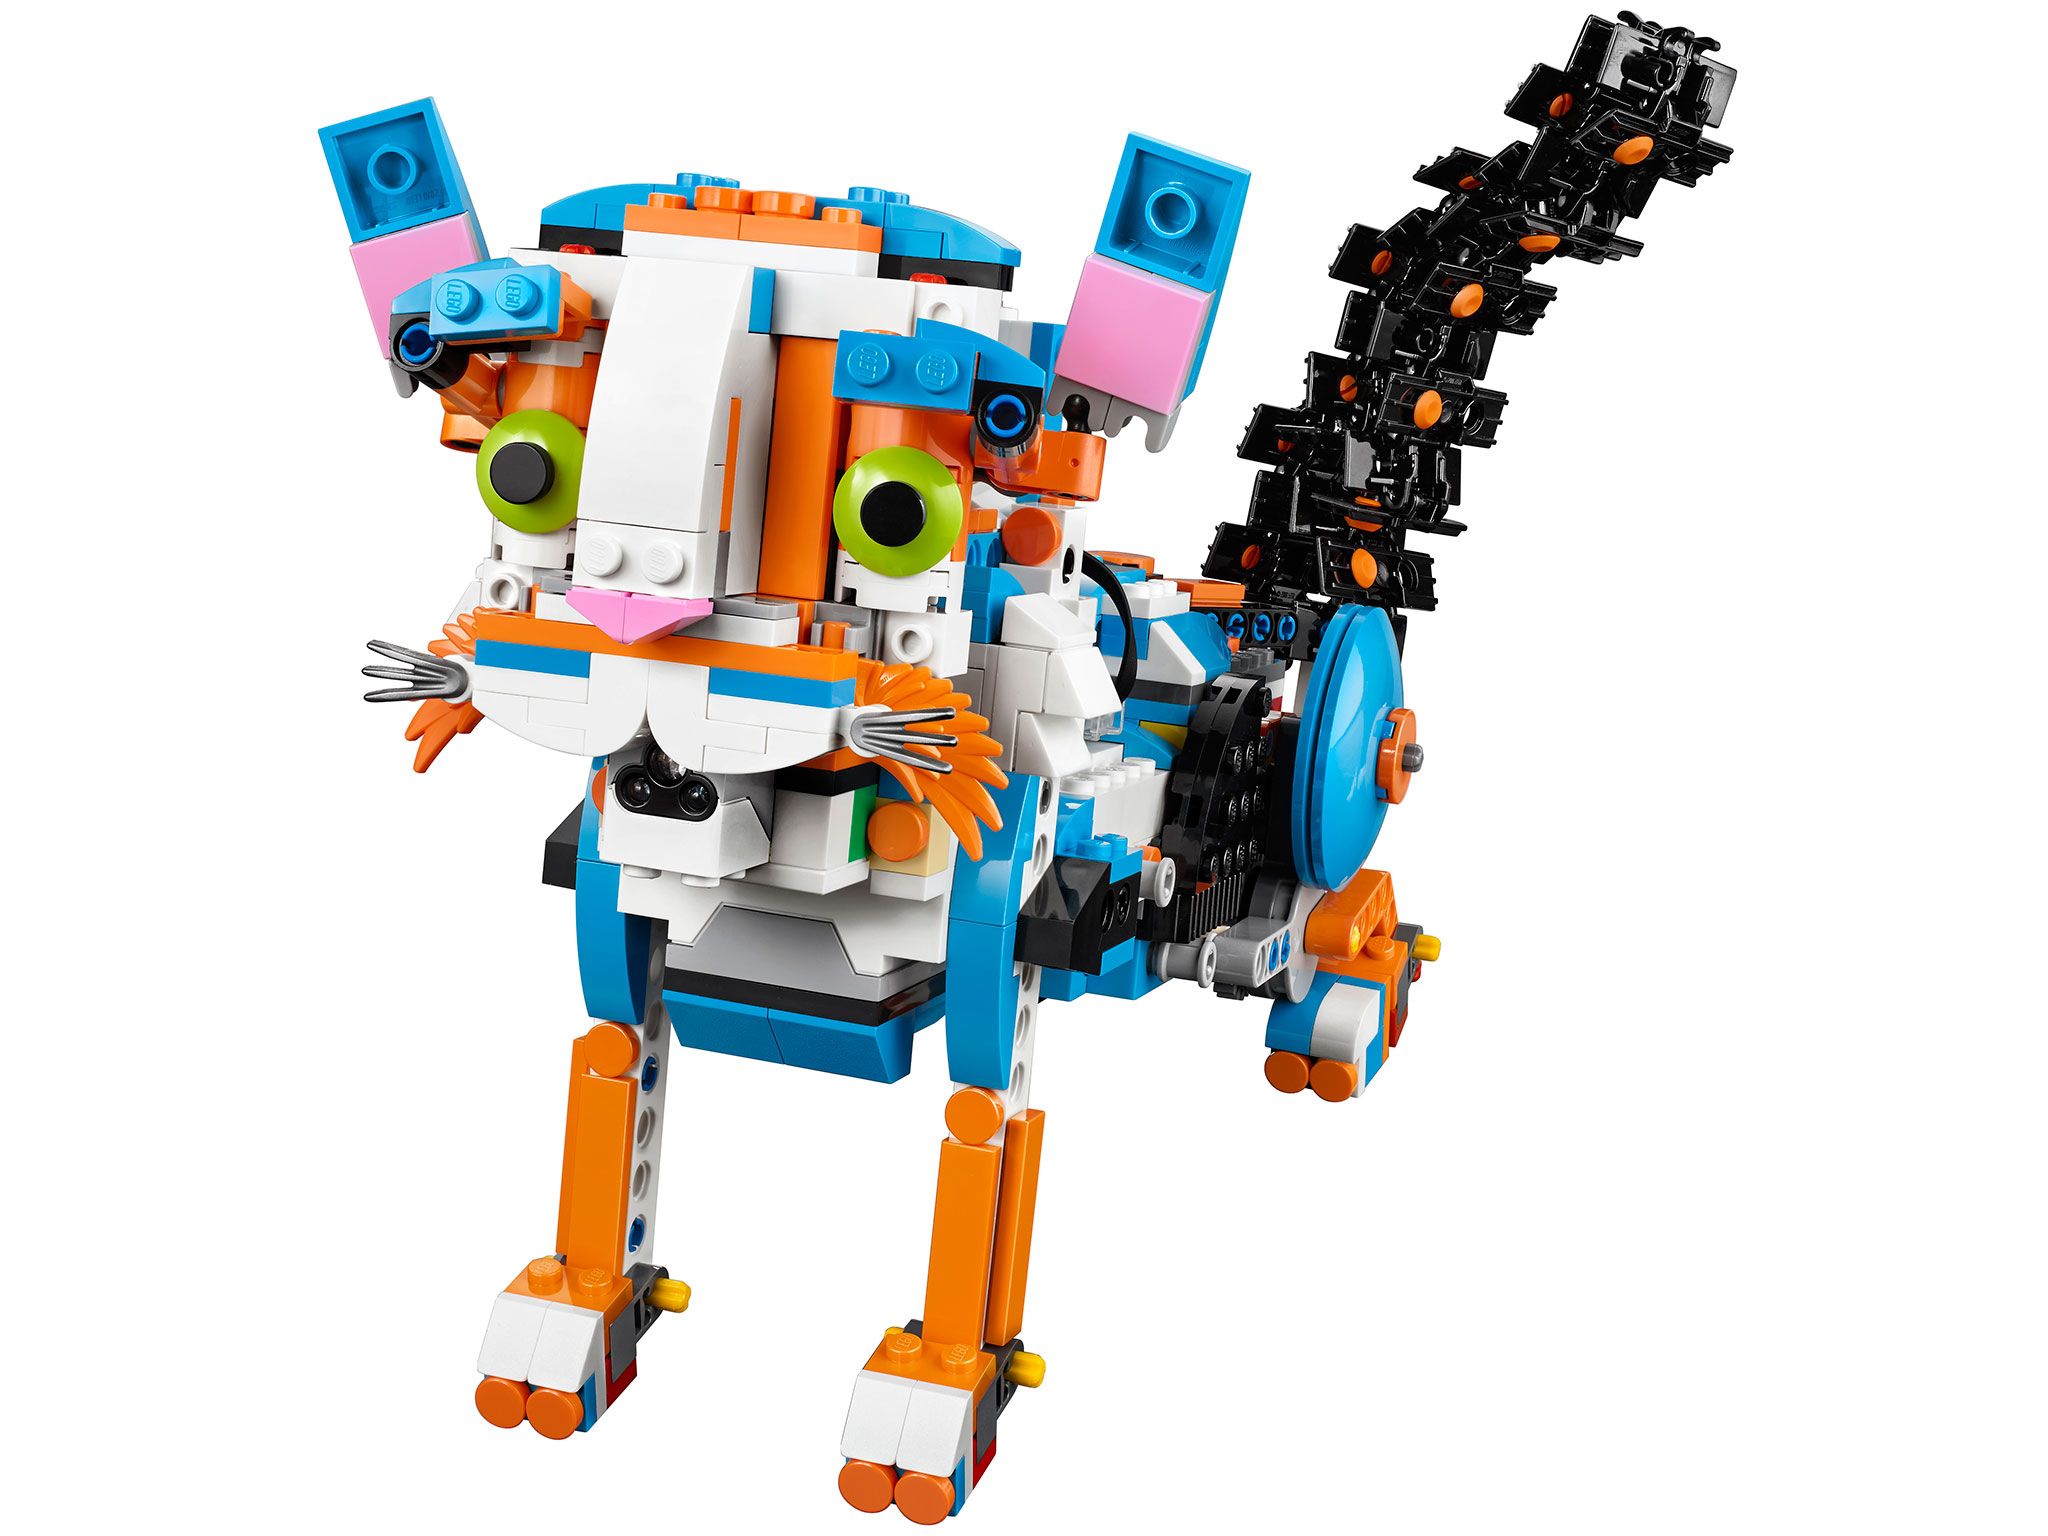 Lego Boost - ROBOTS: Guide to the World Robotics